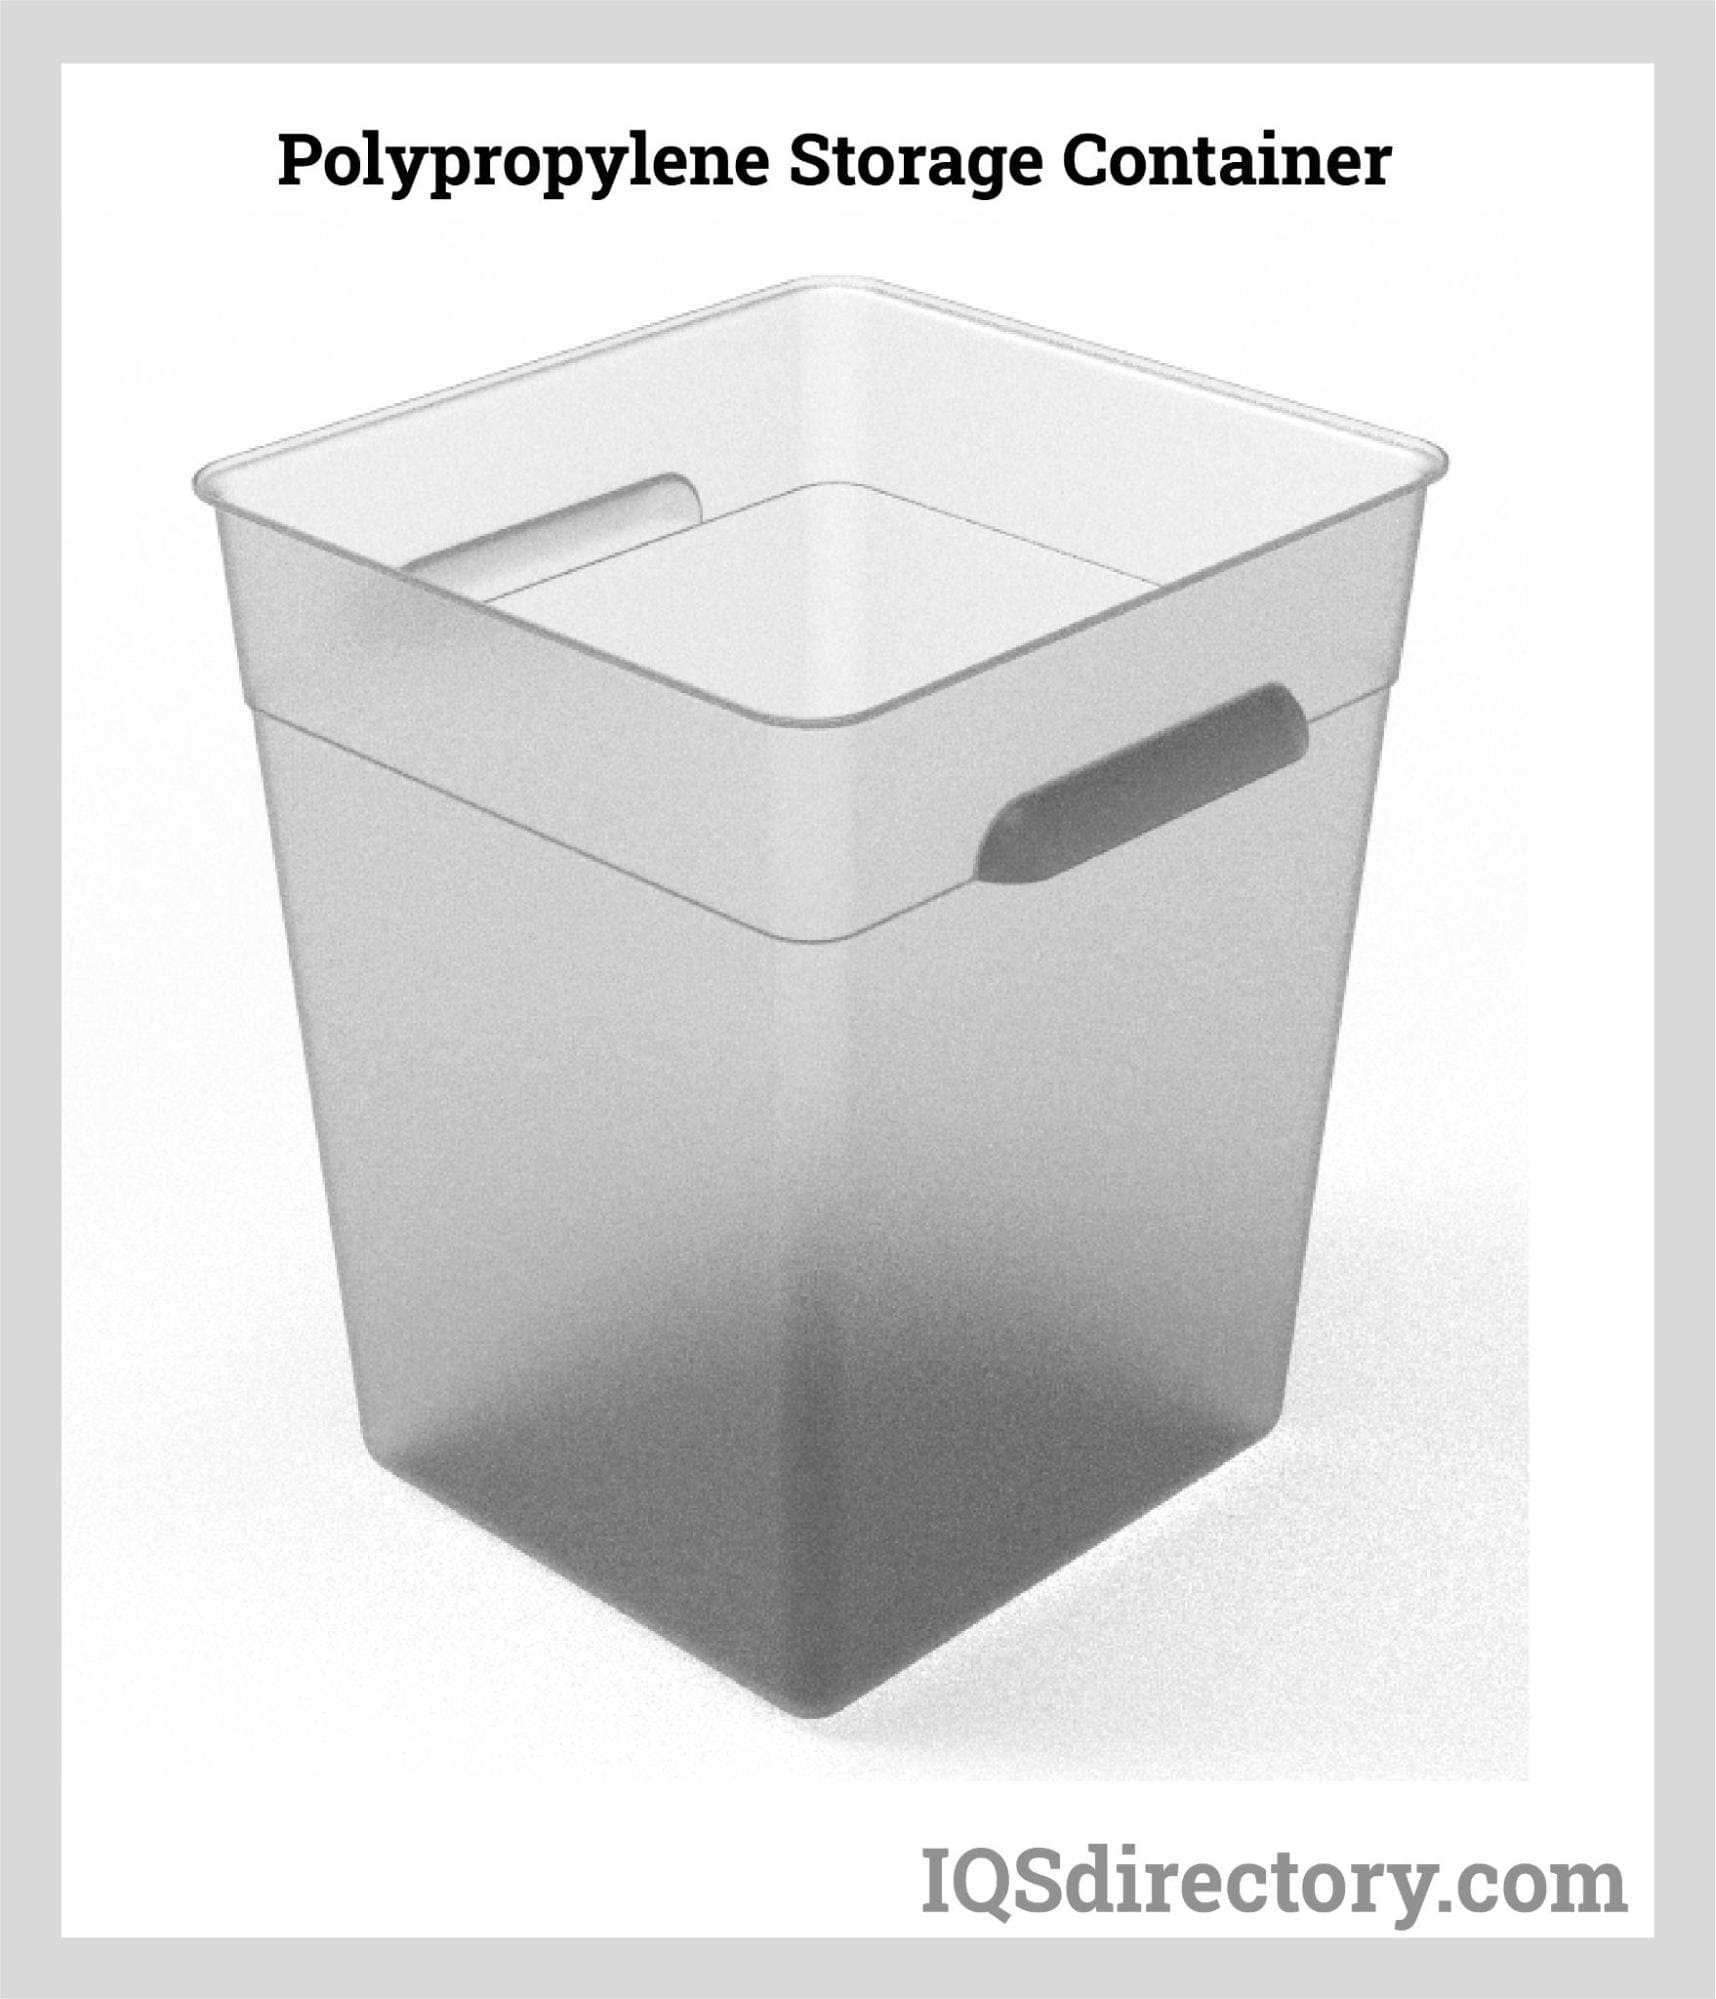 https://www.plastic-containers.net/wp-content/uploads/2023/02/polypropylene-storage-container.jpg